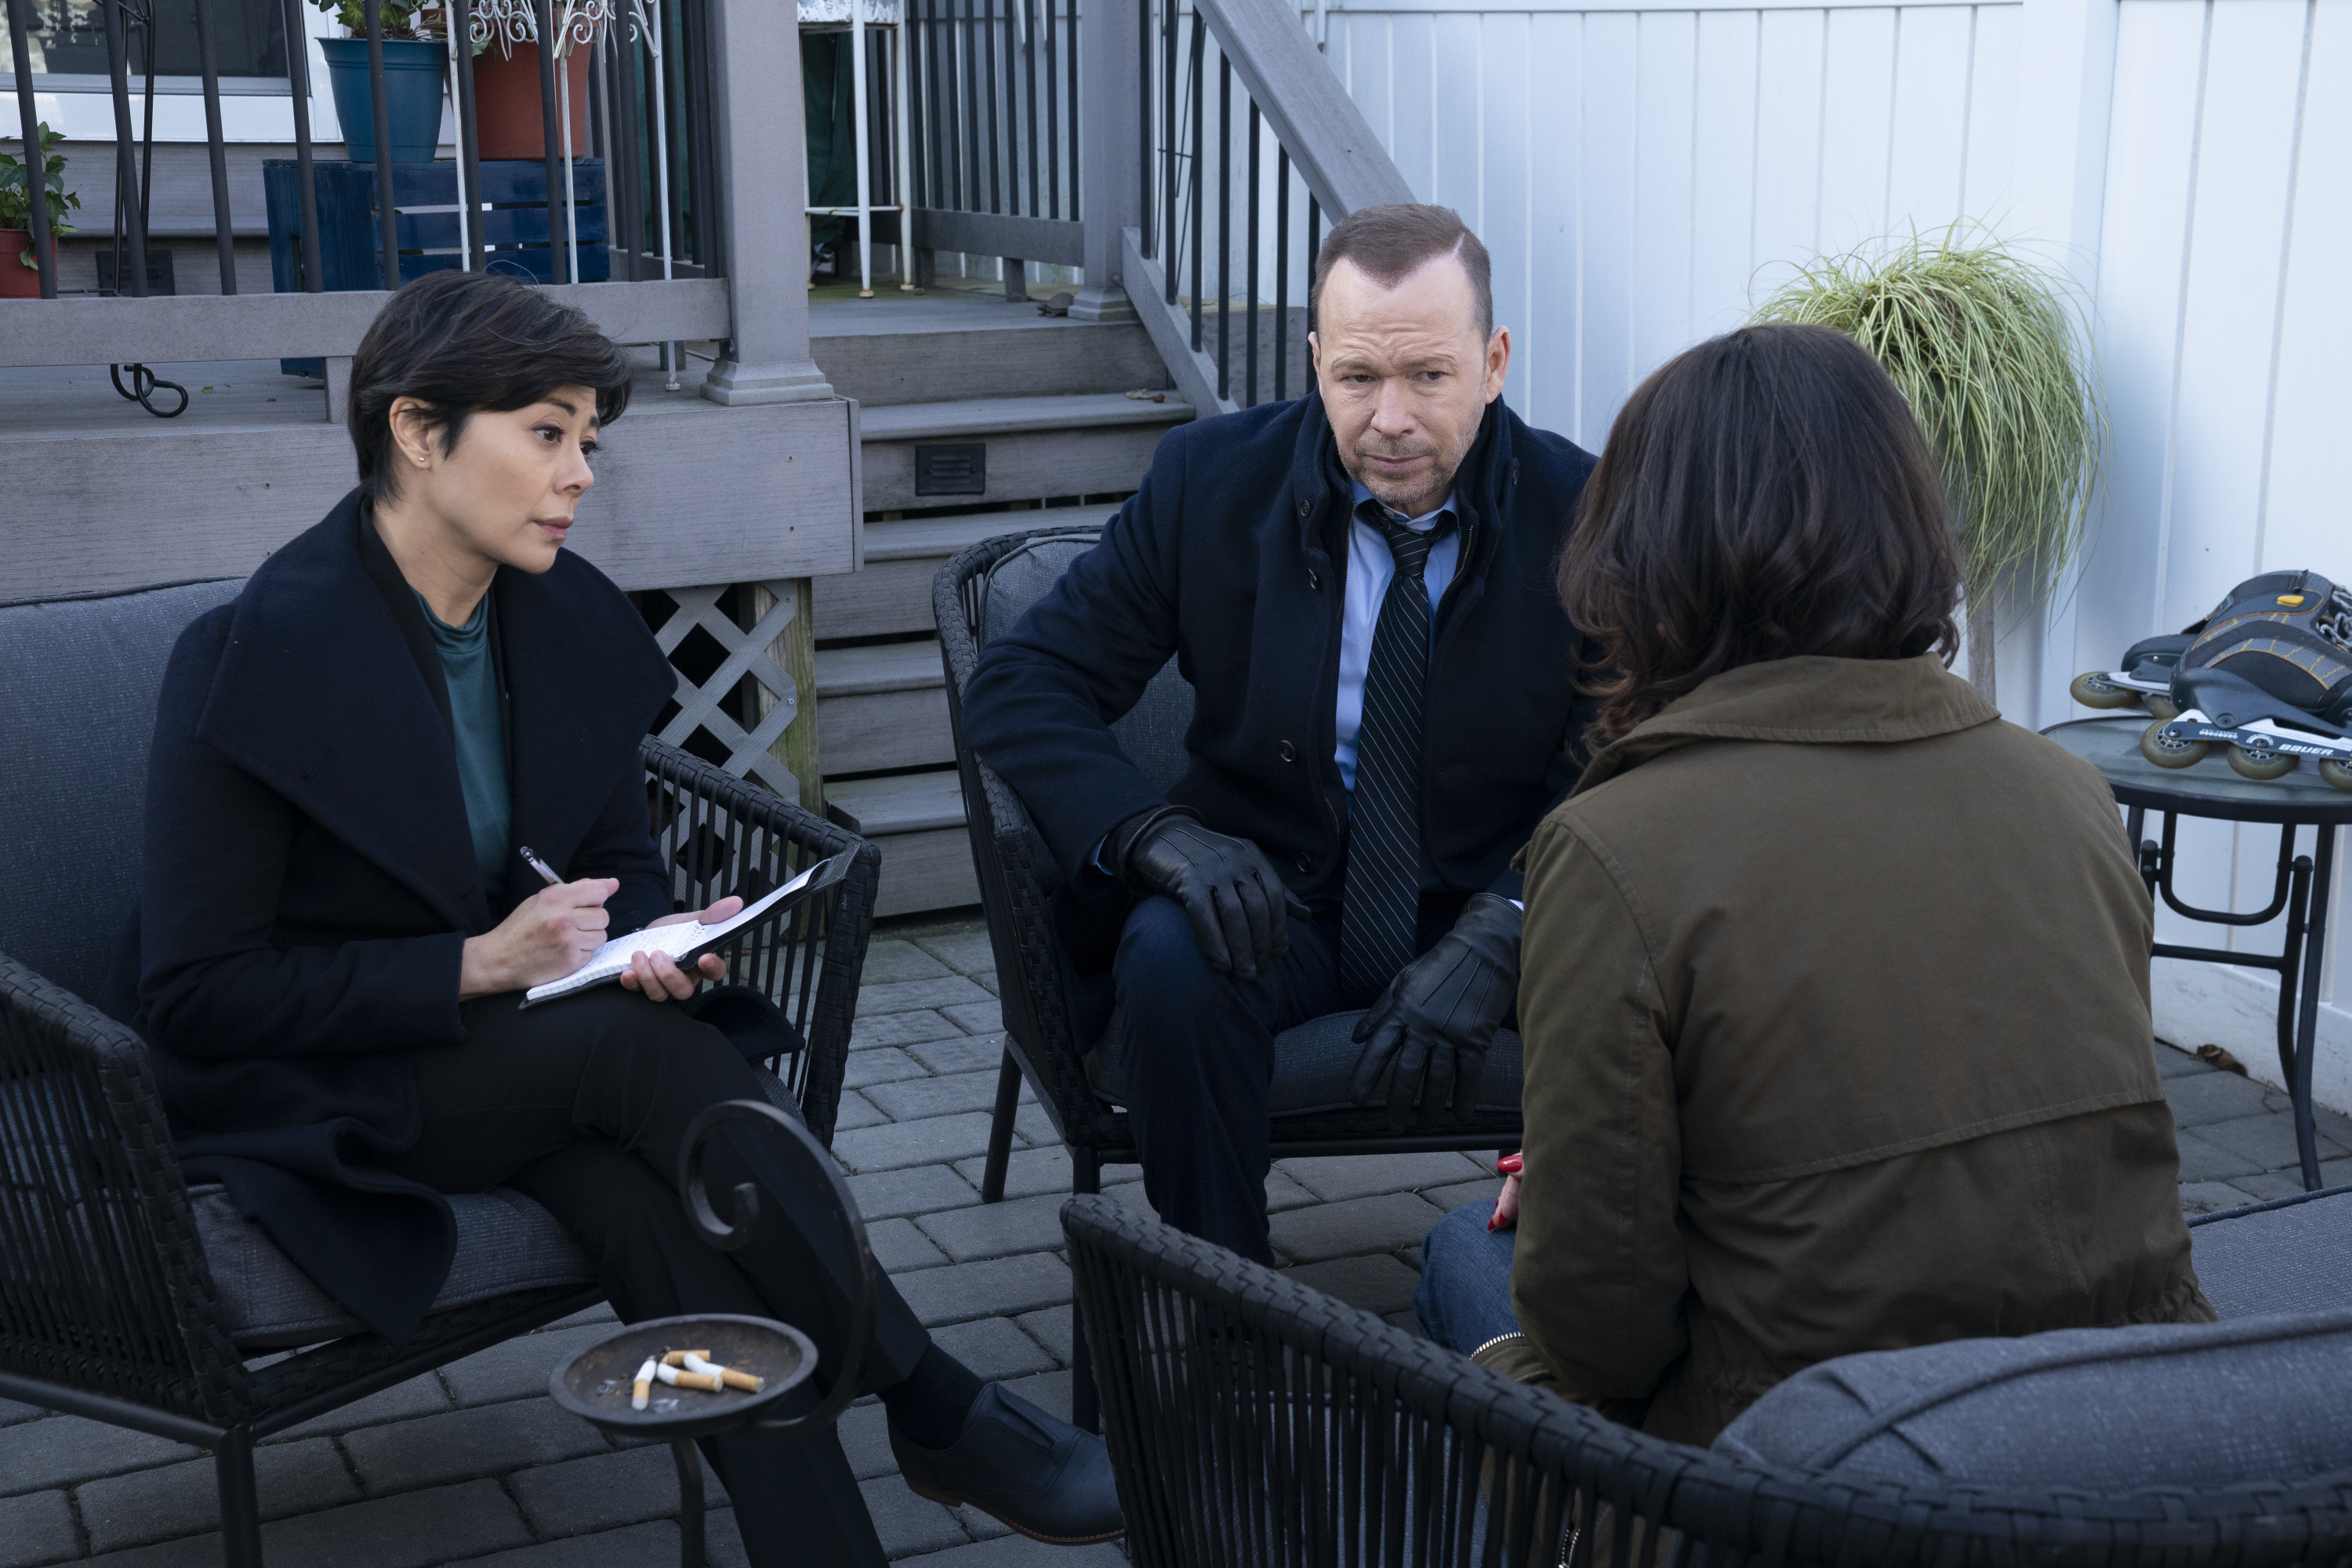 Angel Desai and Donnie Wahlberg on 'Blue Bloods' | Patrick Harbron/CBS via Getty Images